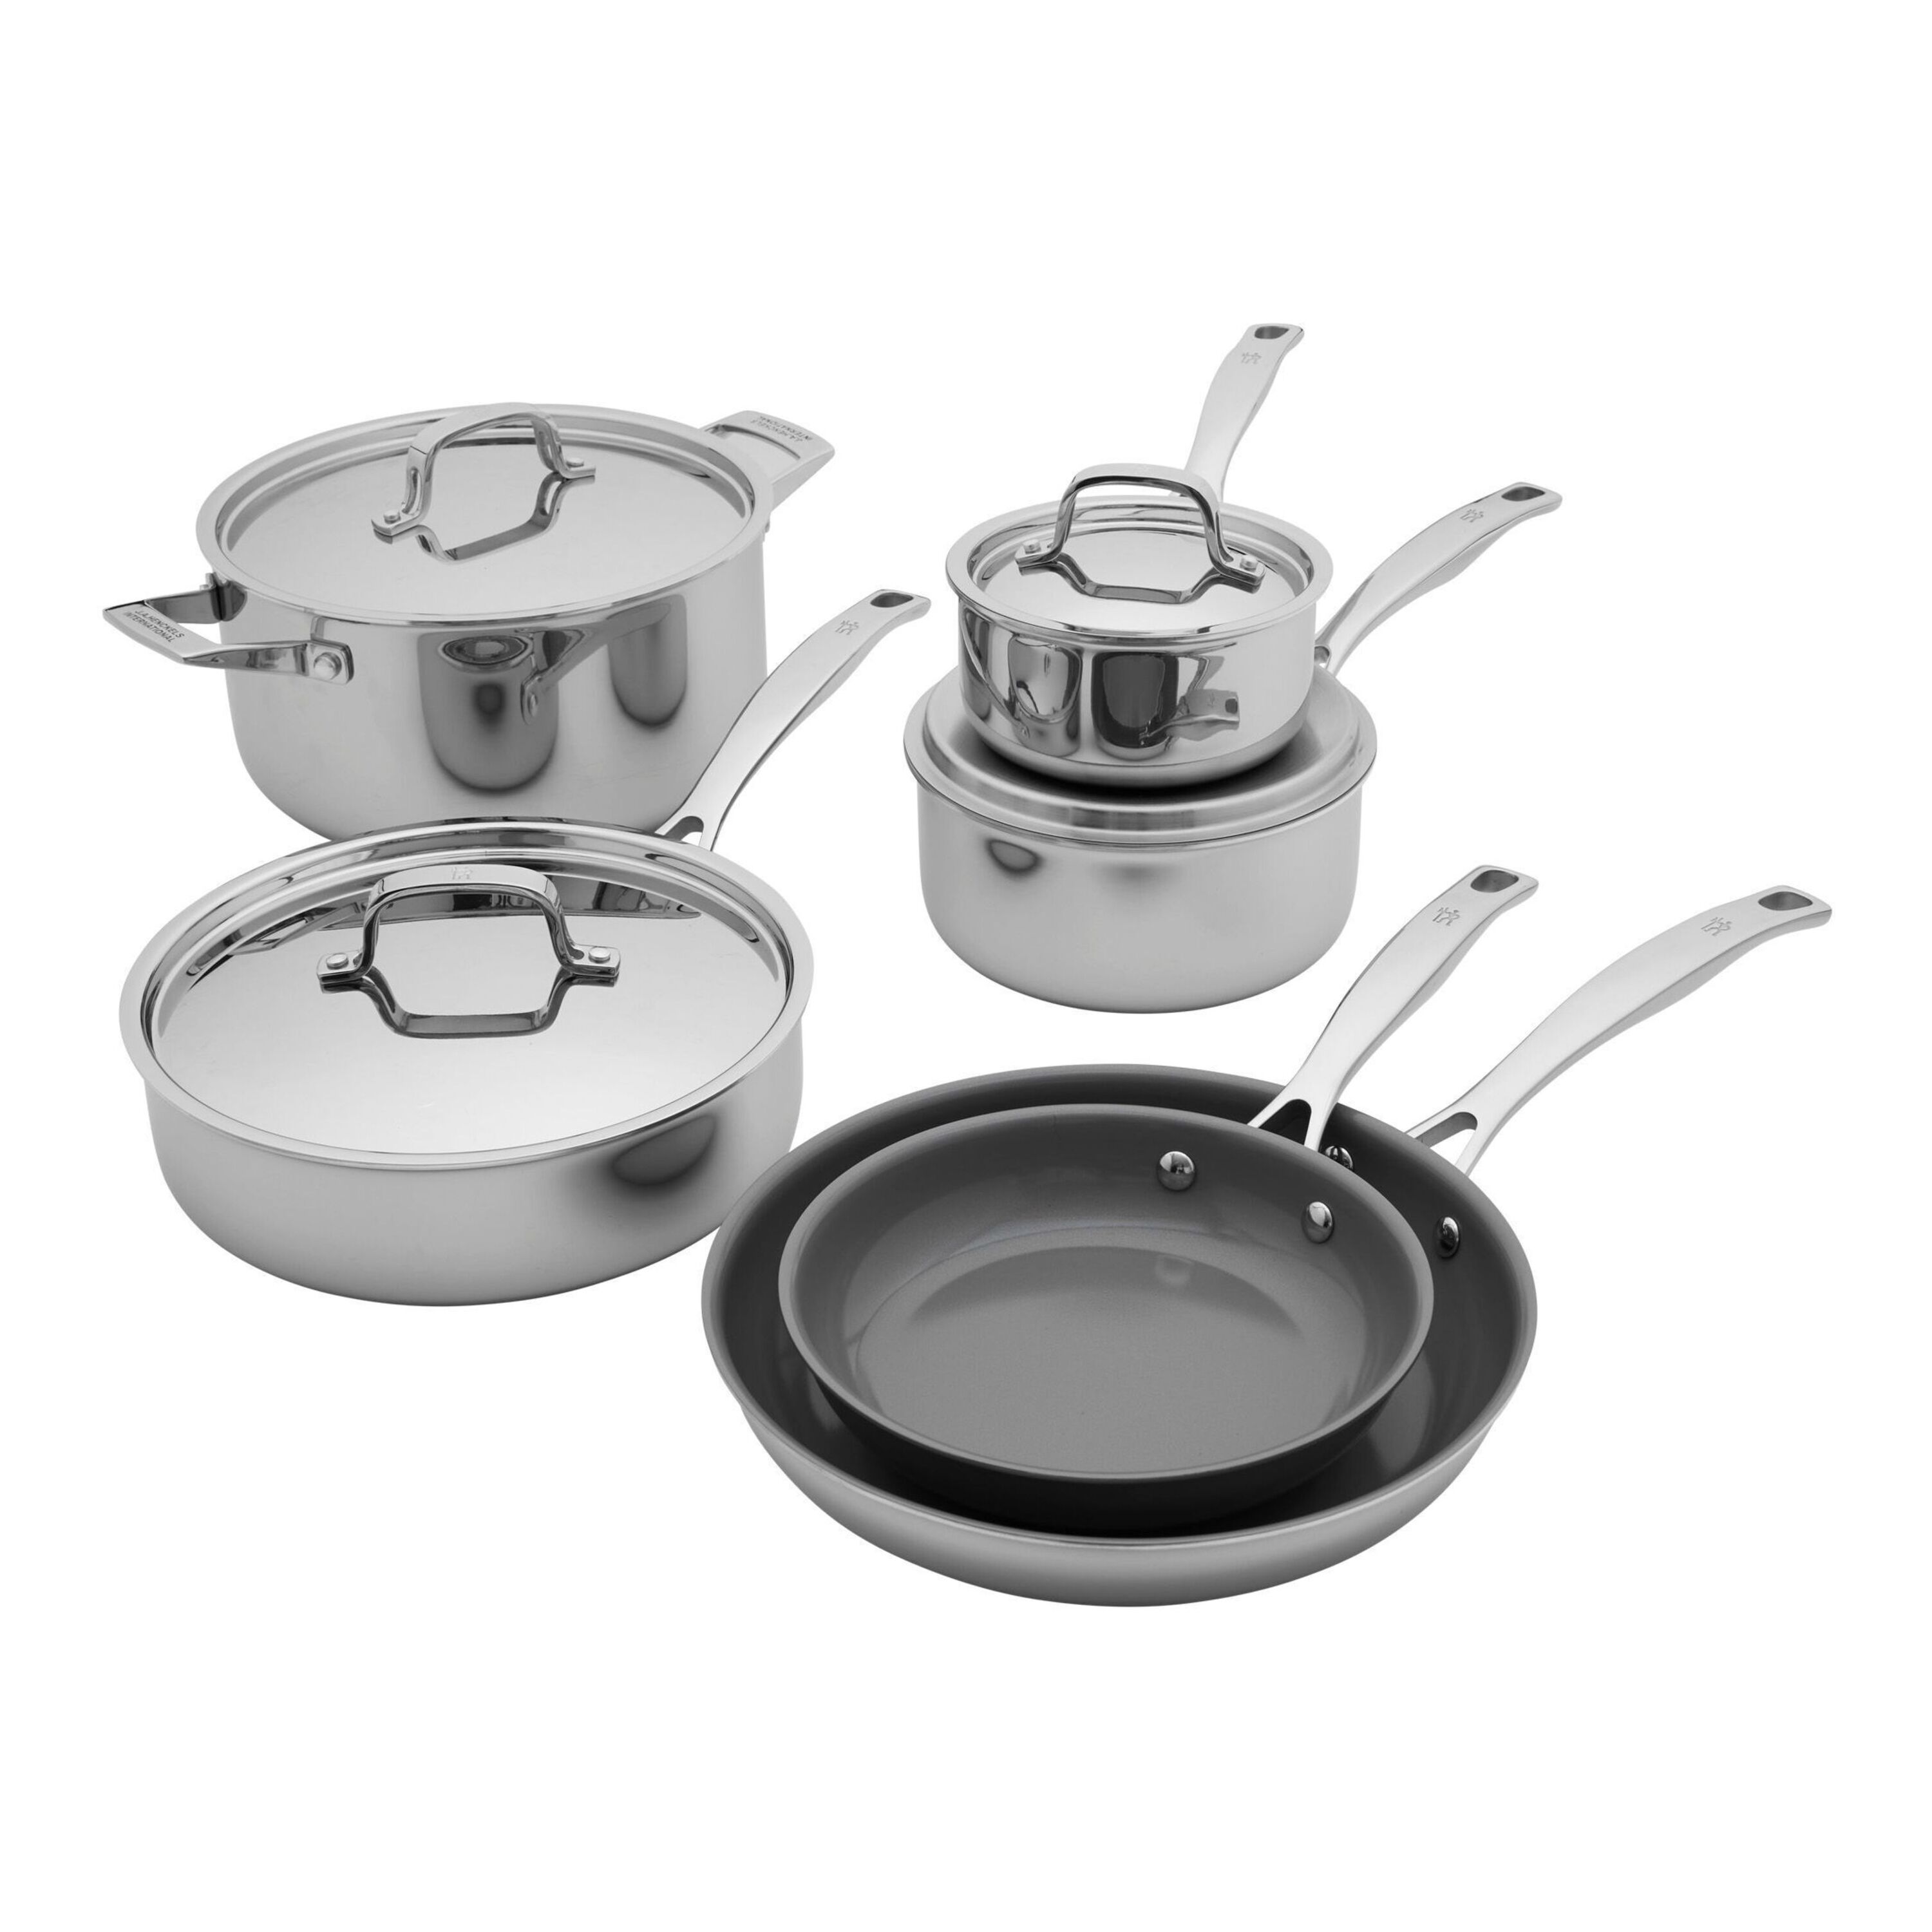 Henckels Clad H3 10-pc, stainless steel ceramic coated pots and pans set